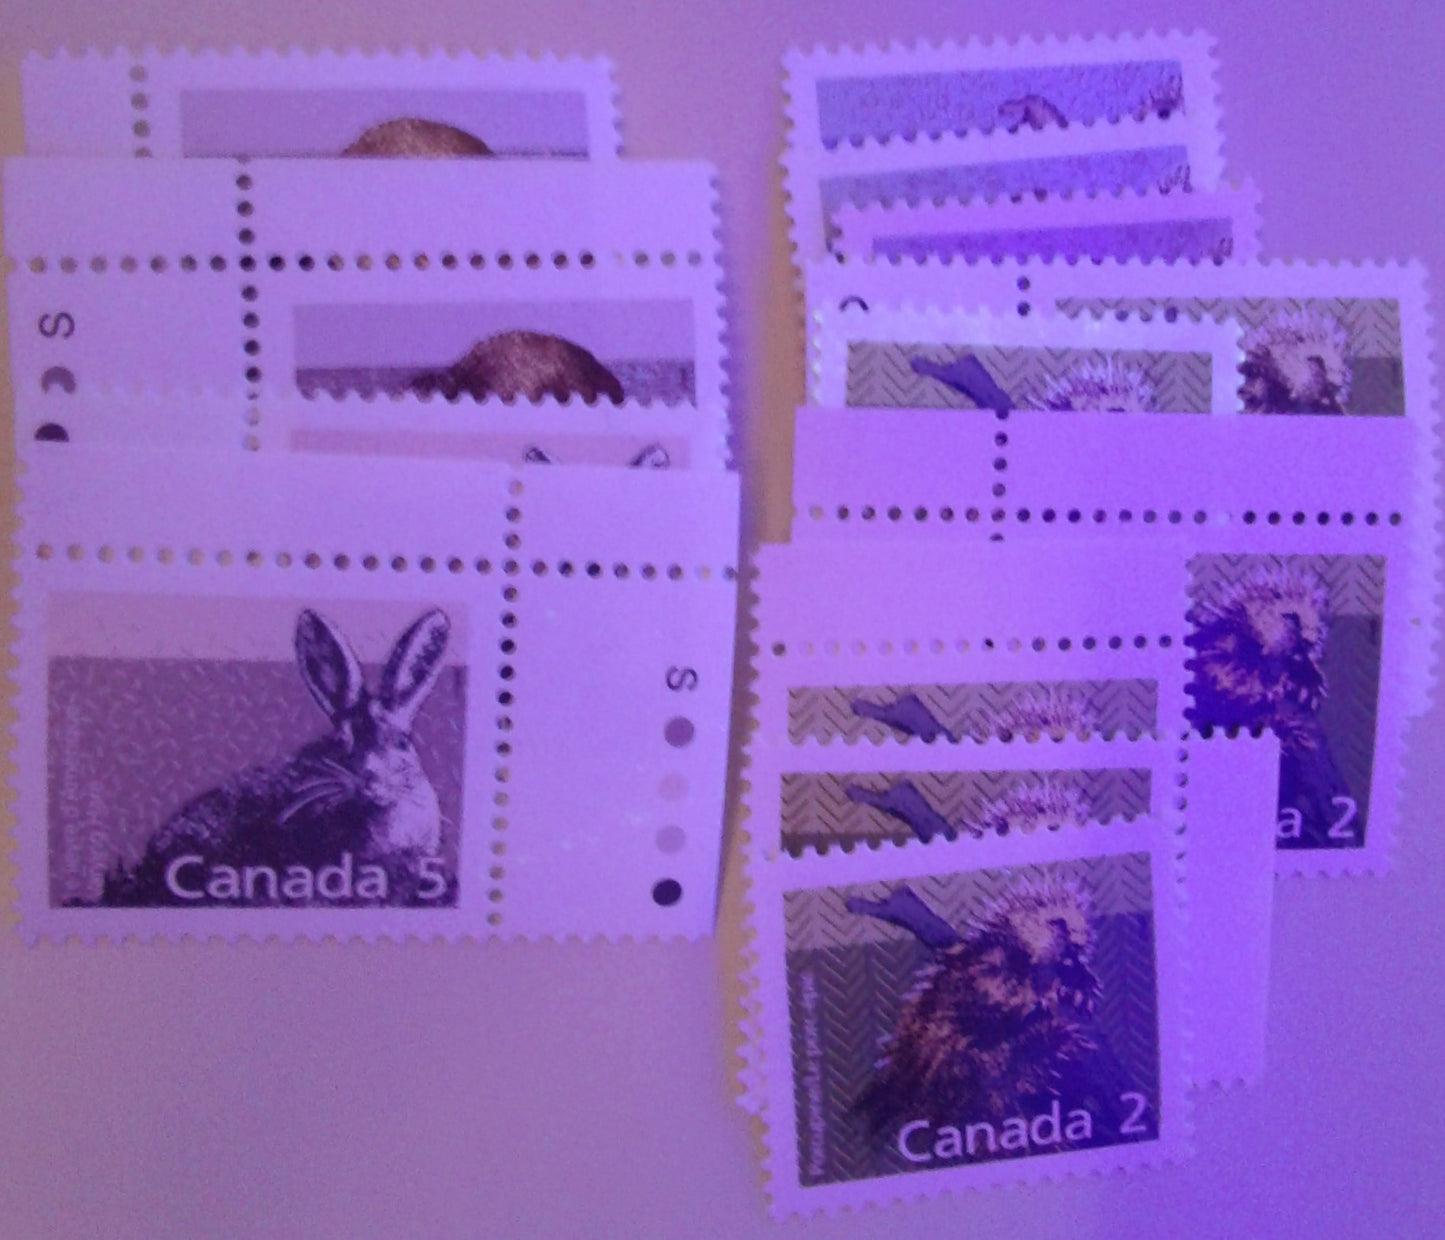 Canada #1155, 1155i 1c Flying Squirrel 1988-1991 Wildlife and Architecture Issue, a VFNH Group of 3 Field Stock Blocks on DF/DF Slater Paper and Dead/NF Coated Papers Paper